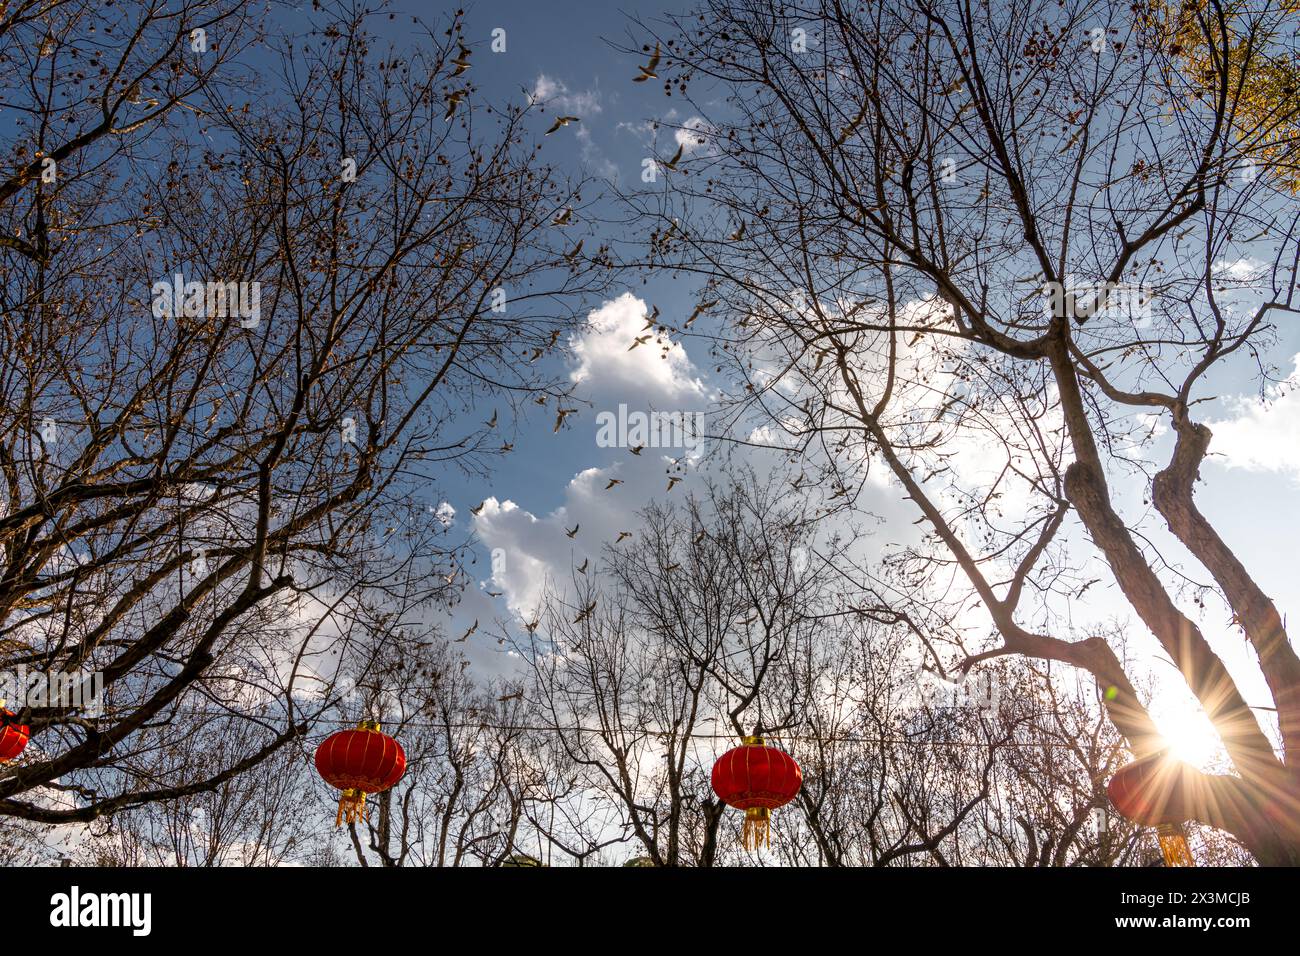 Chinese red lanterns, flying birds and the sunset sky in Kunming city park, China Stock Photo